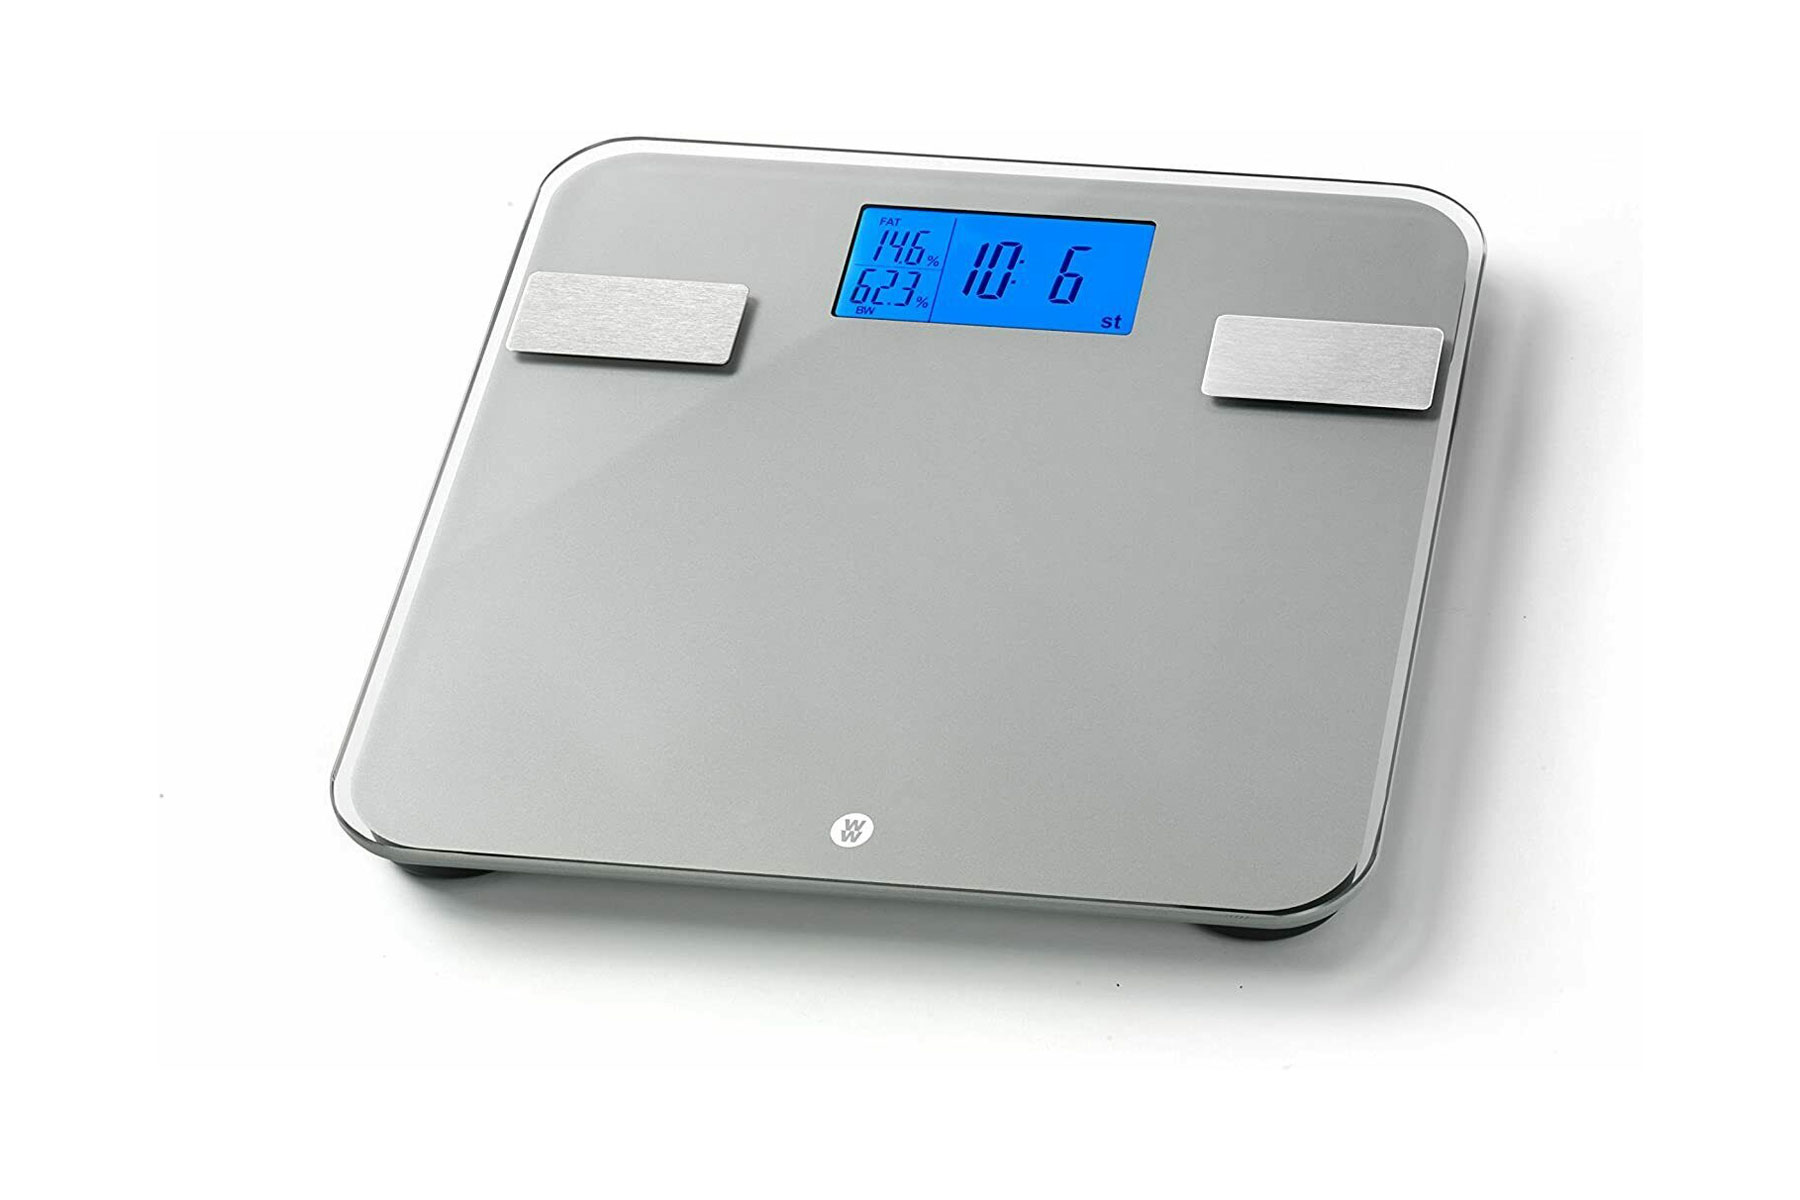 WEIGHT SCALE